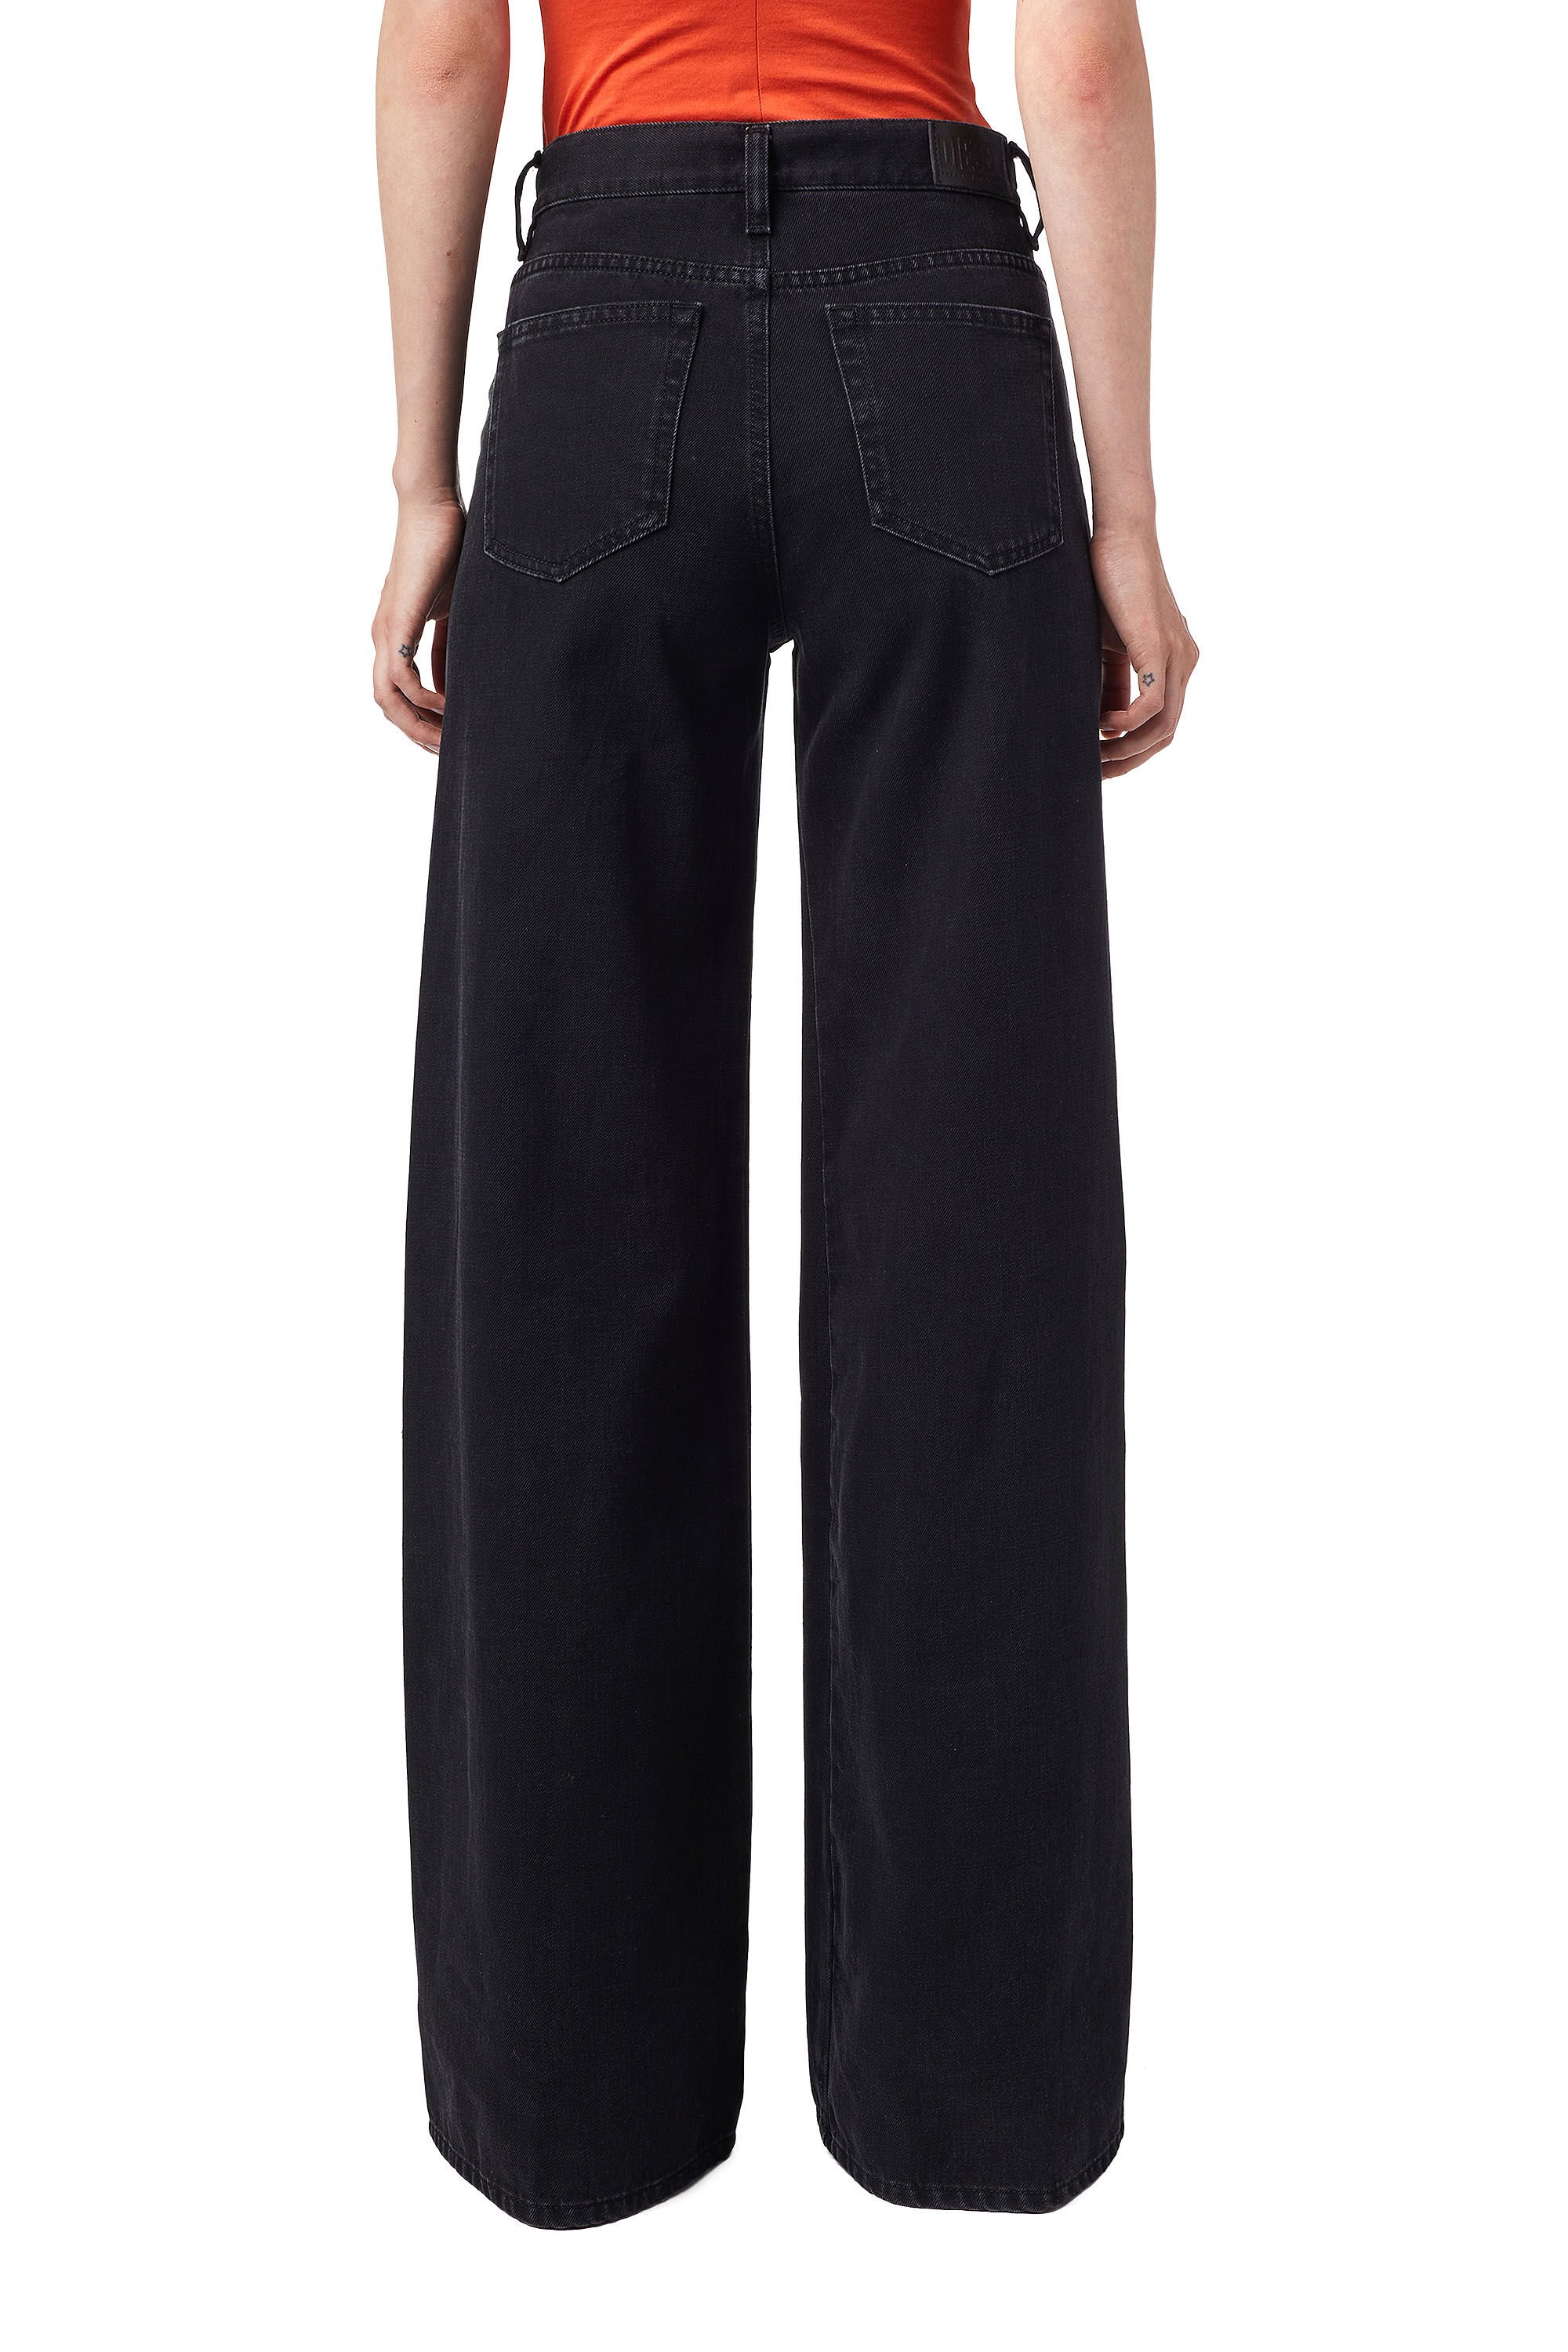 Diesel - D-Akemi Z09RL Bootcut and Flare Jeans,  - Image 5